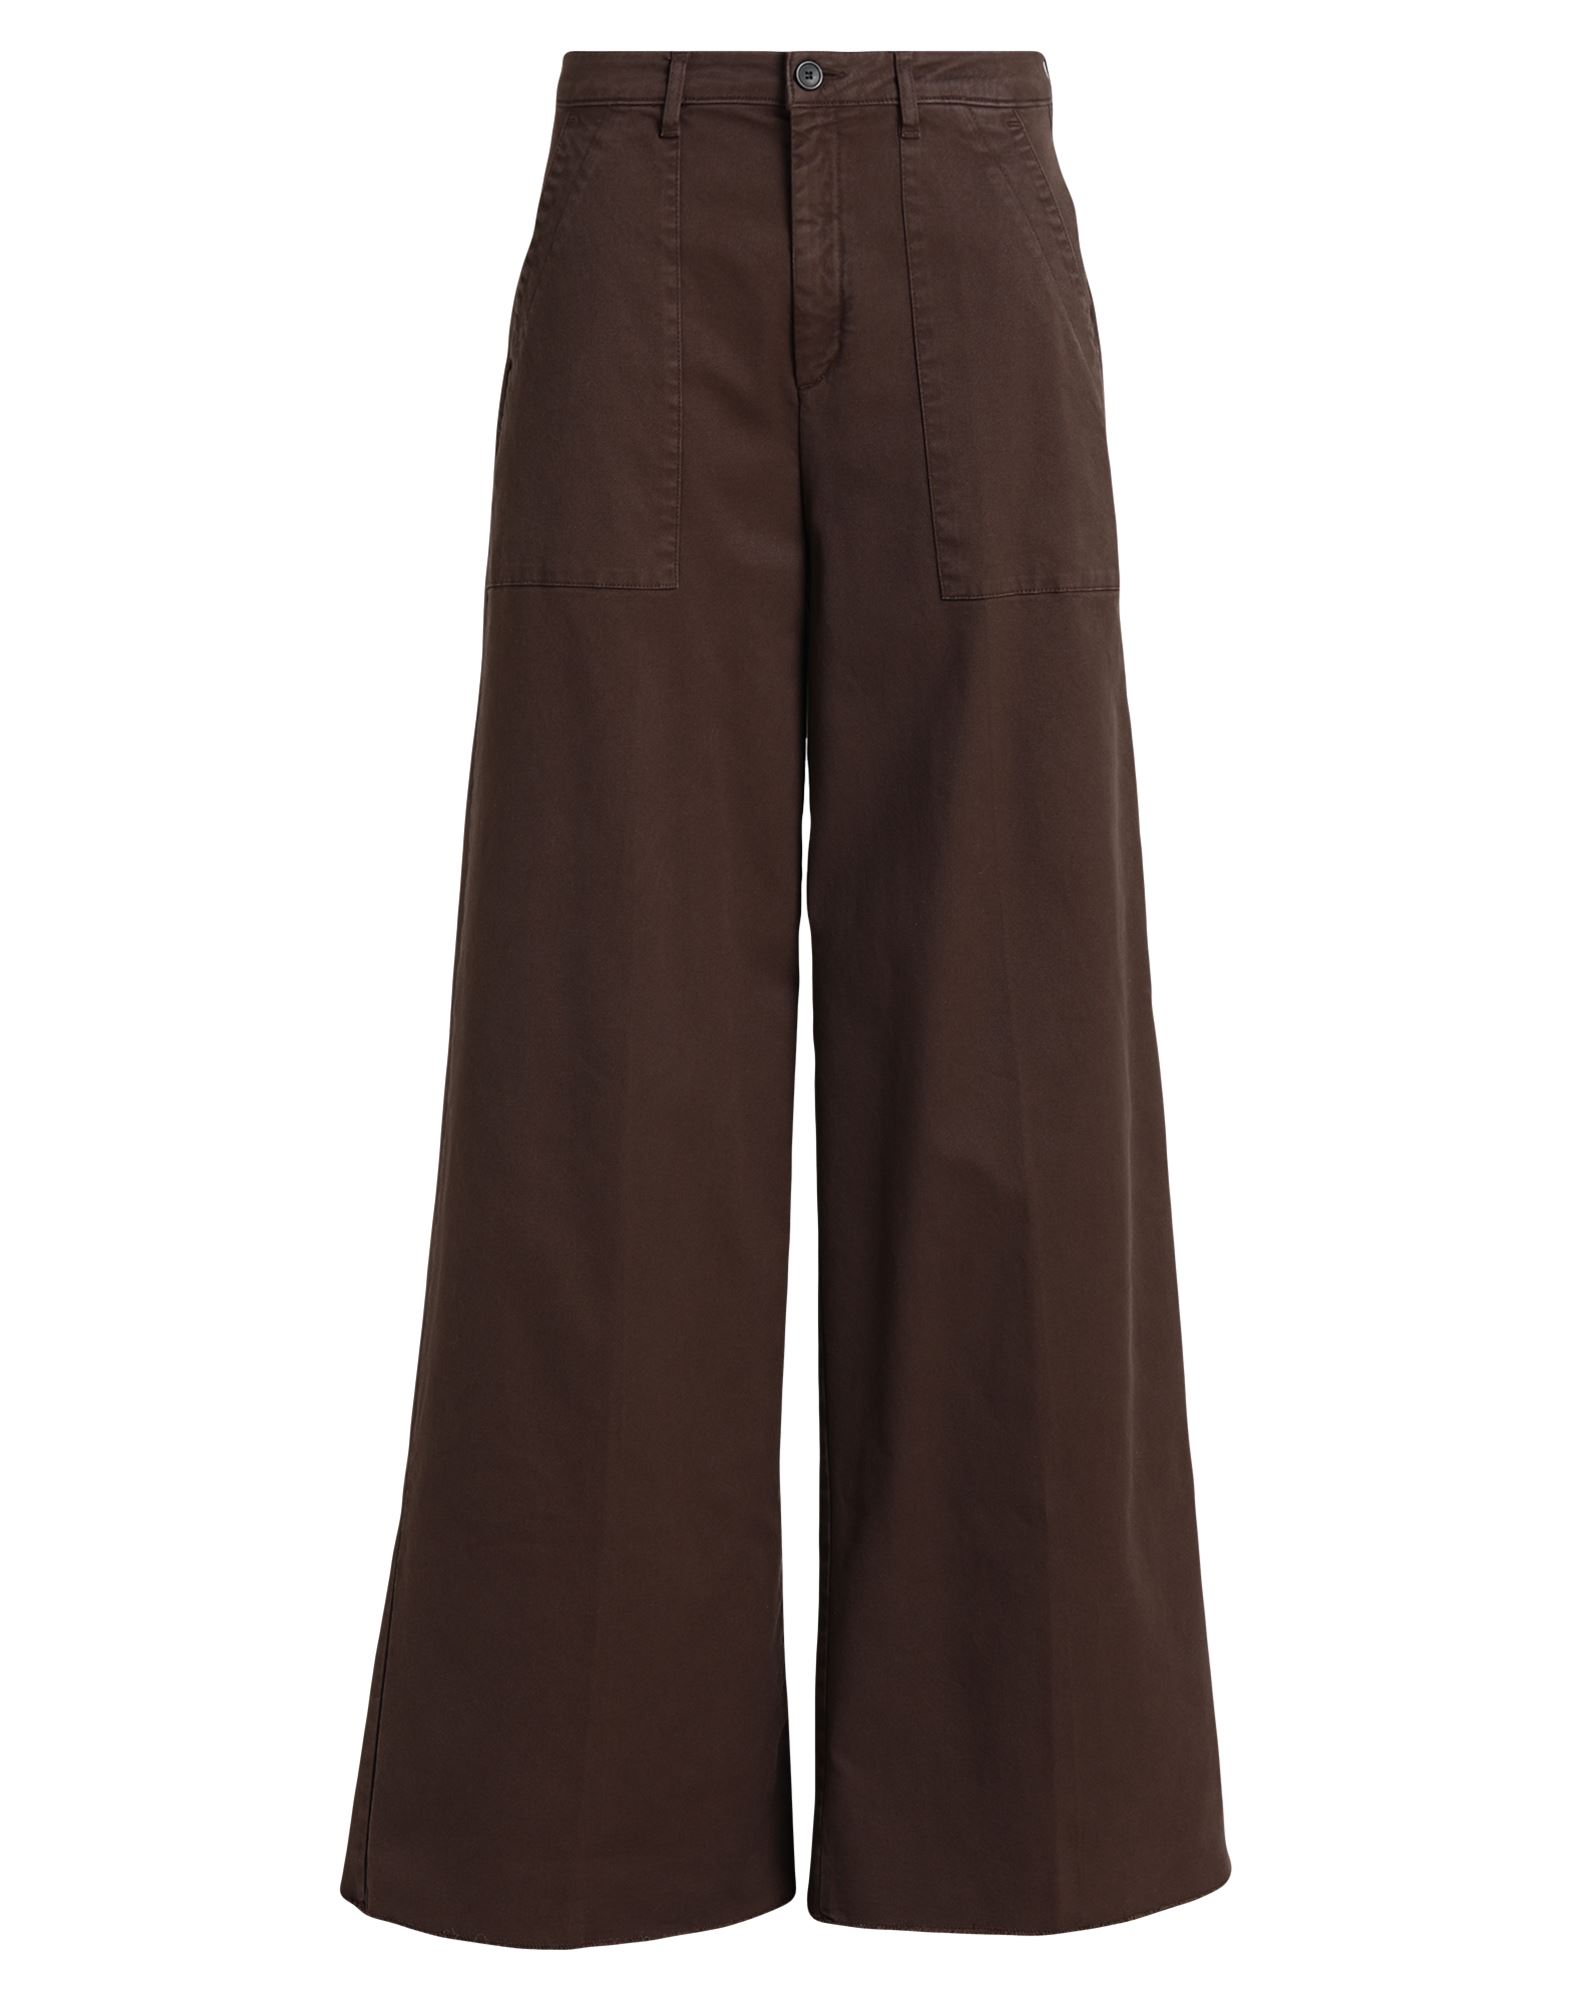 Department 5 Pants In Cocoa